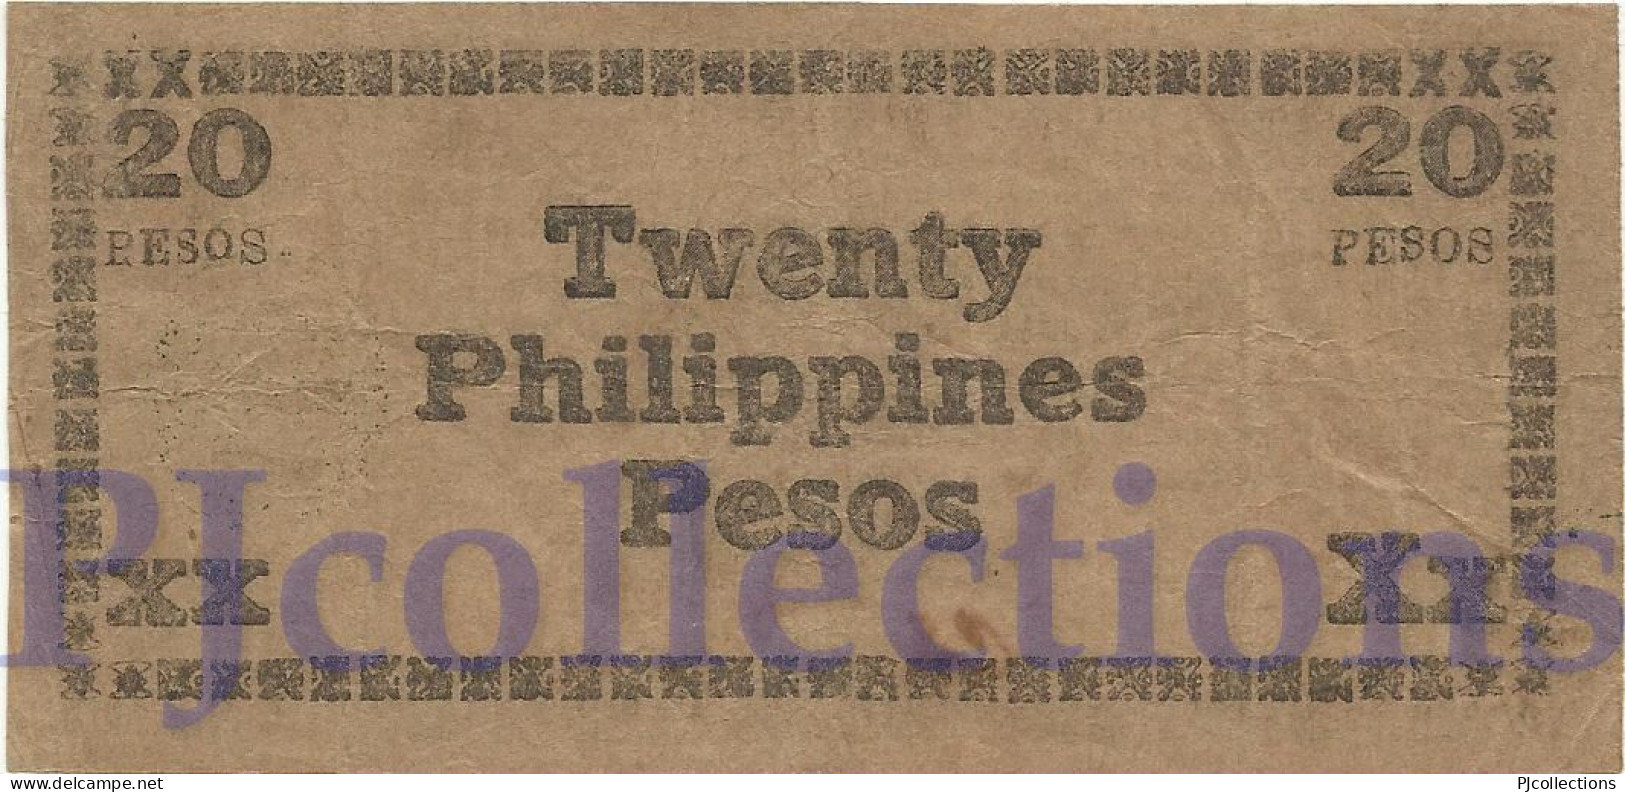 PHILIPPINES 20 PESOS 1944 PICK S680a VF EMERGENCY BANKNOTE - Philippinen